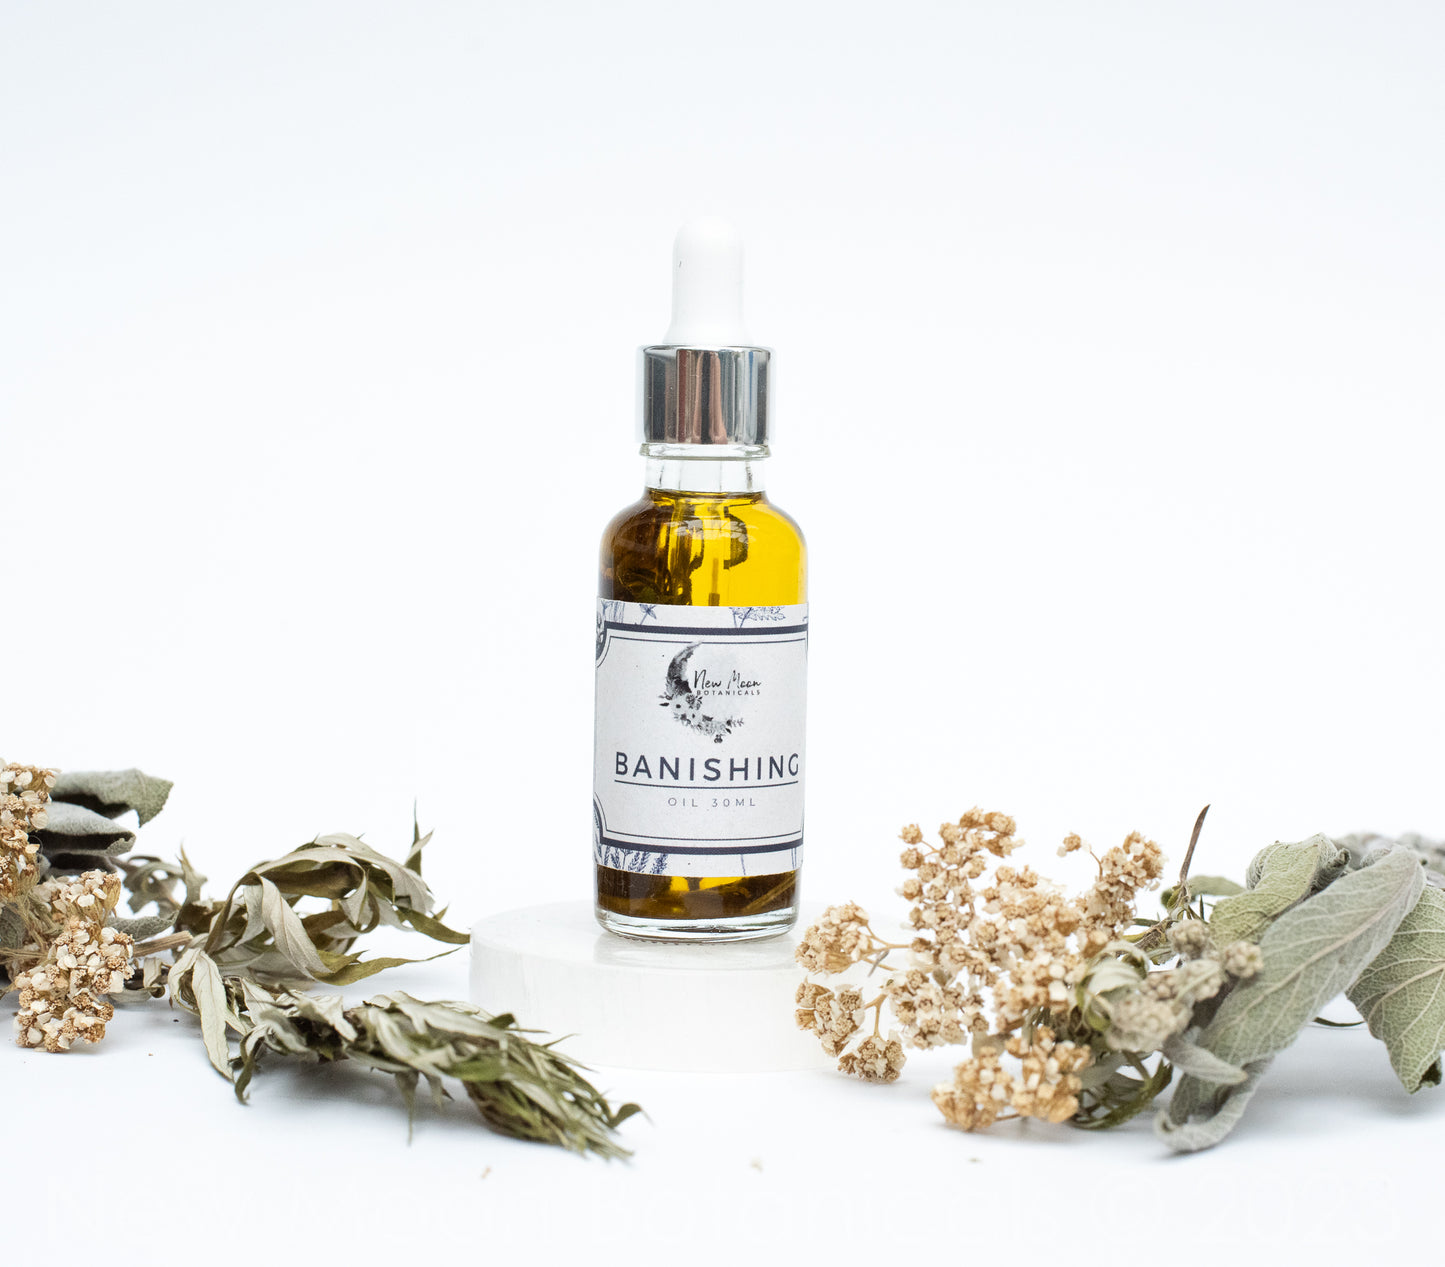 Banishing Oil with Botanicals & Essential Oils.